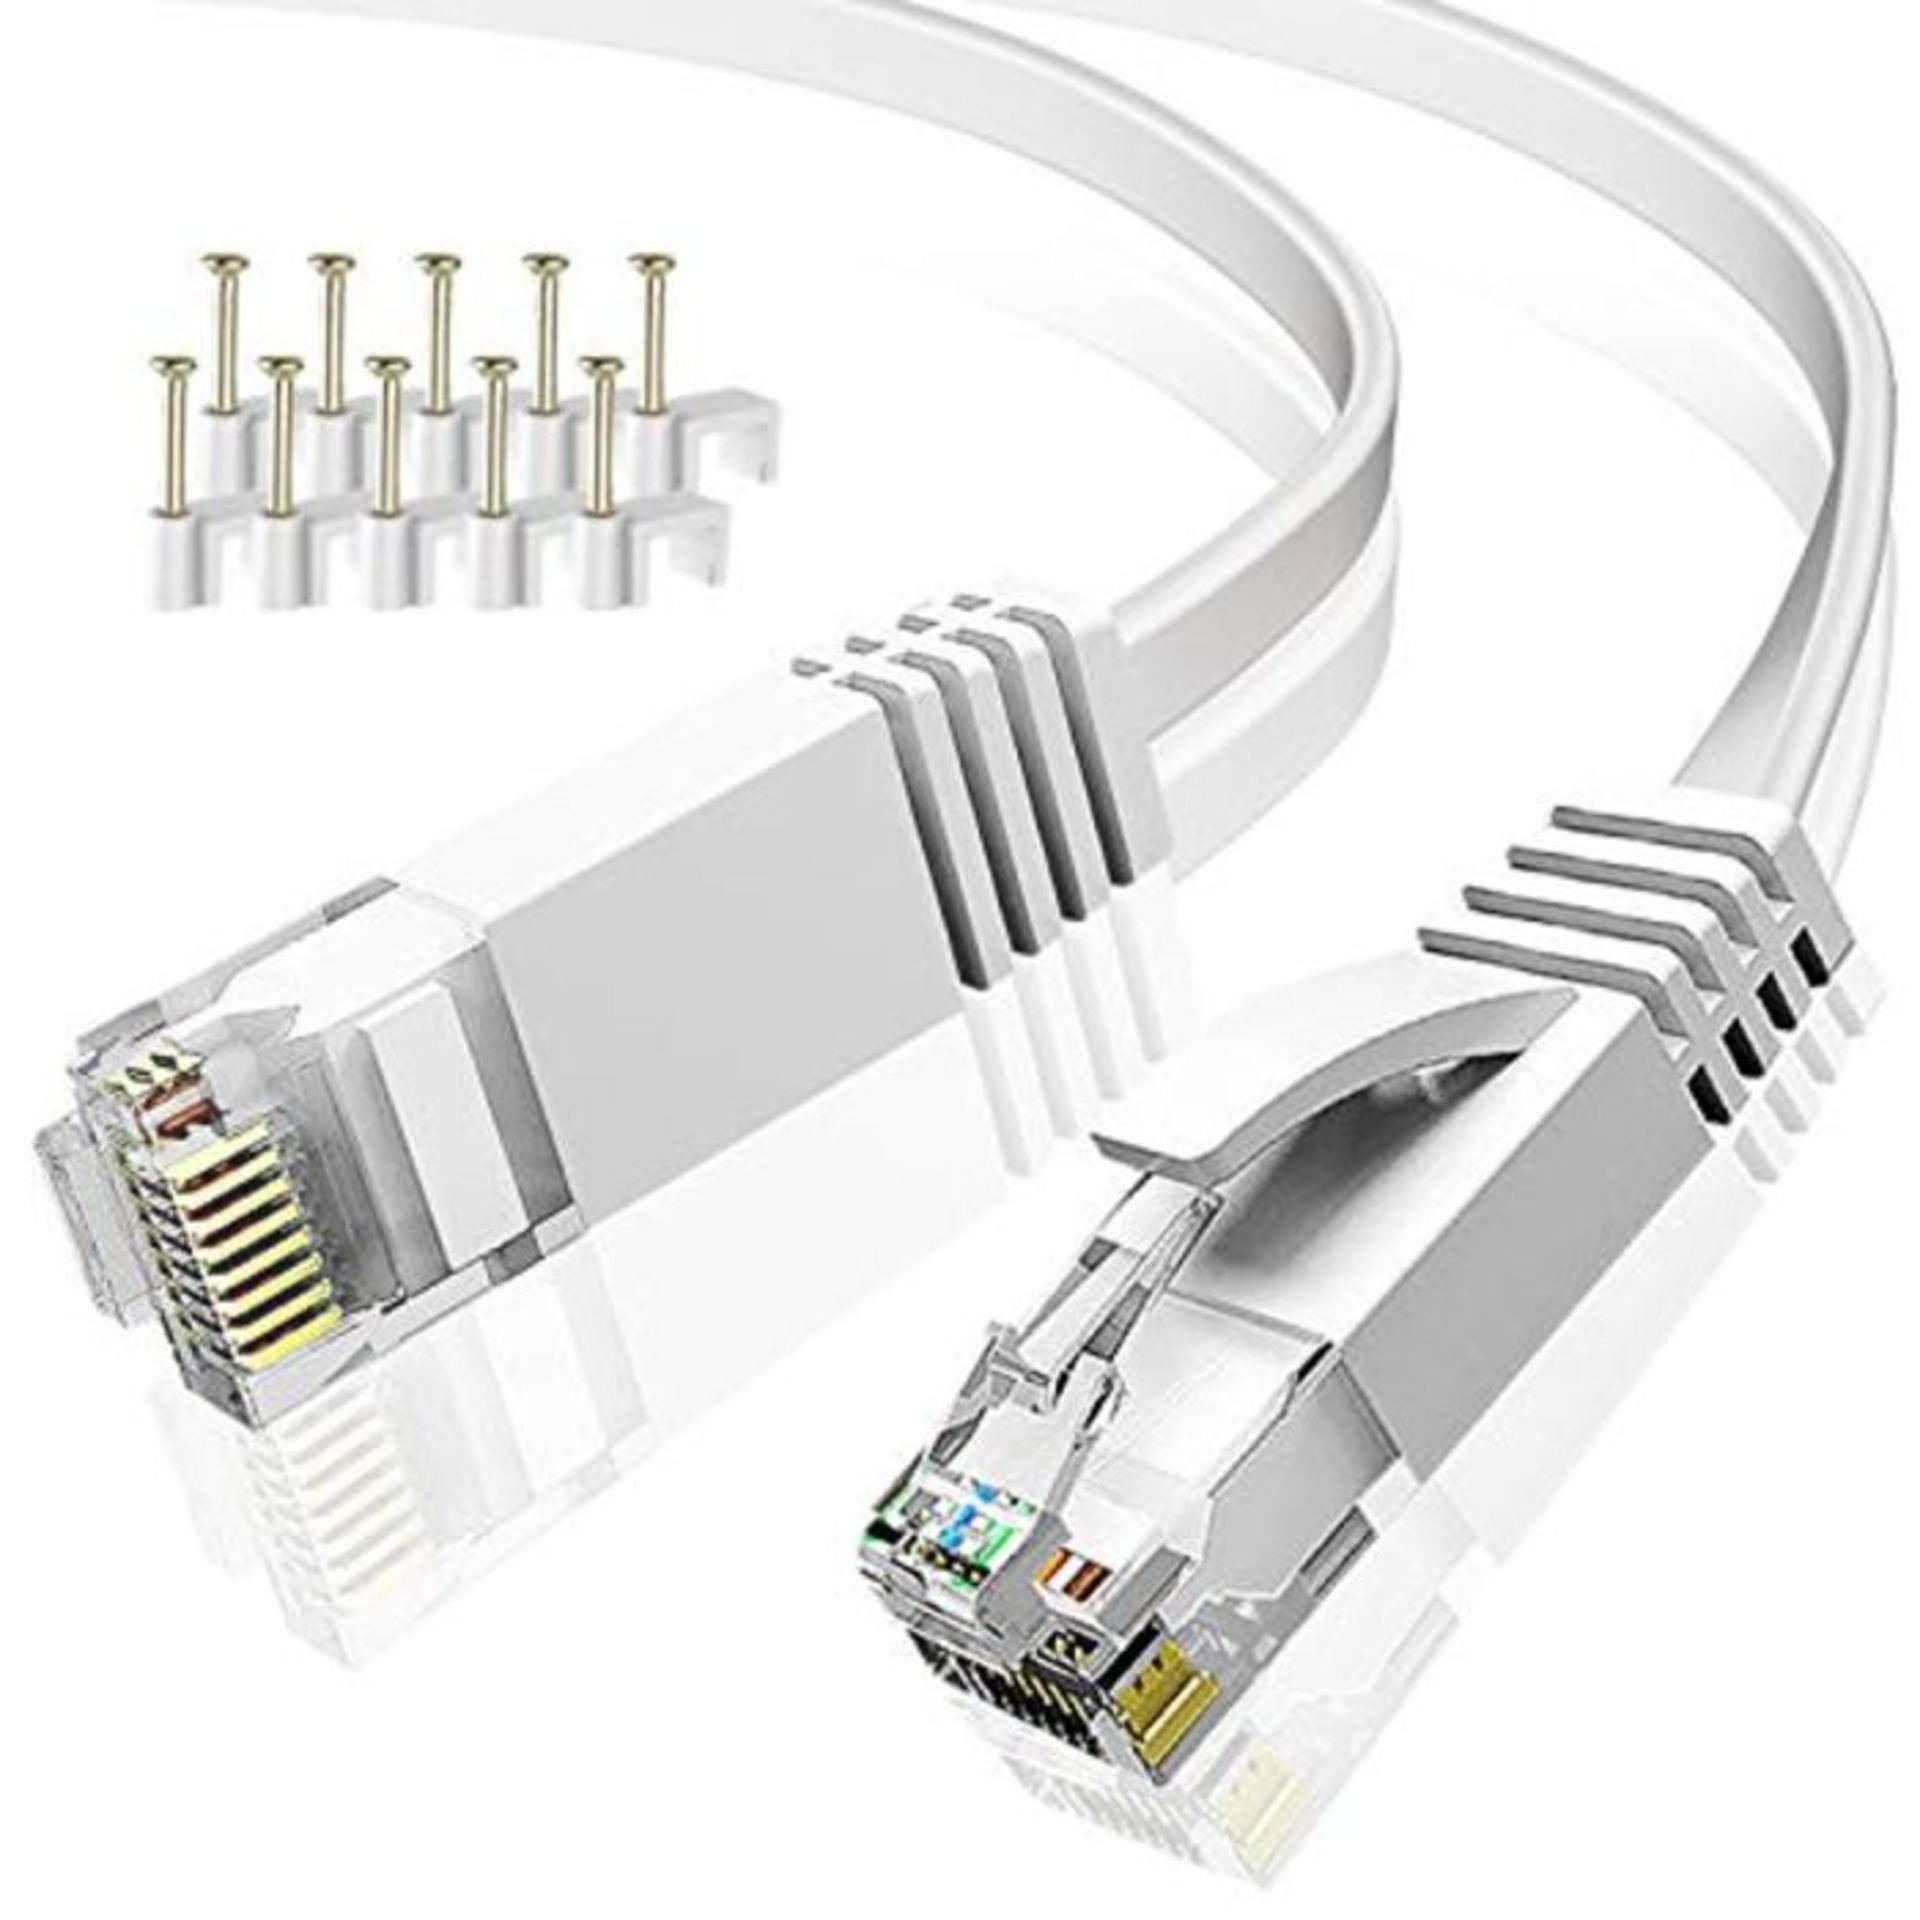 [INCOMPLETE] Lemeend Ethernet Cable 5m,Cat6 Gigabit Lan Network RJ45 High-Speed Patch